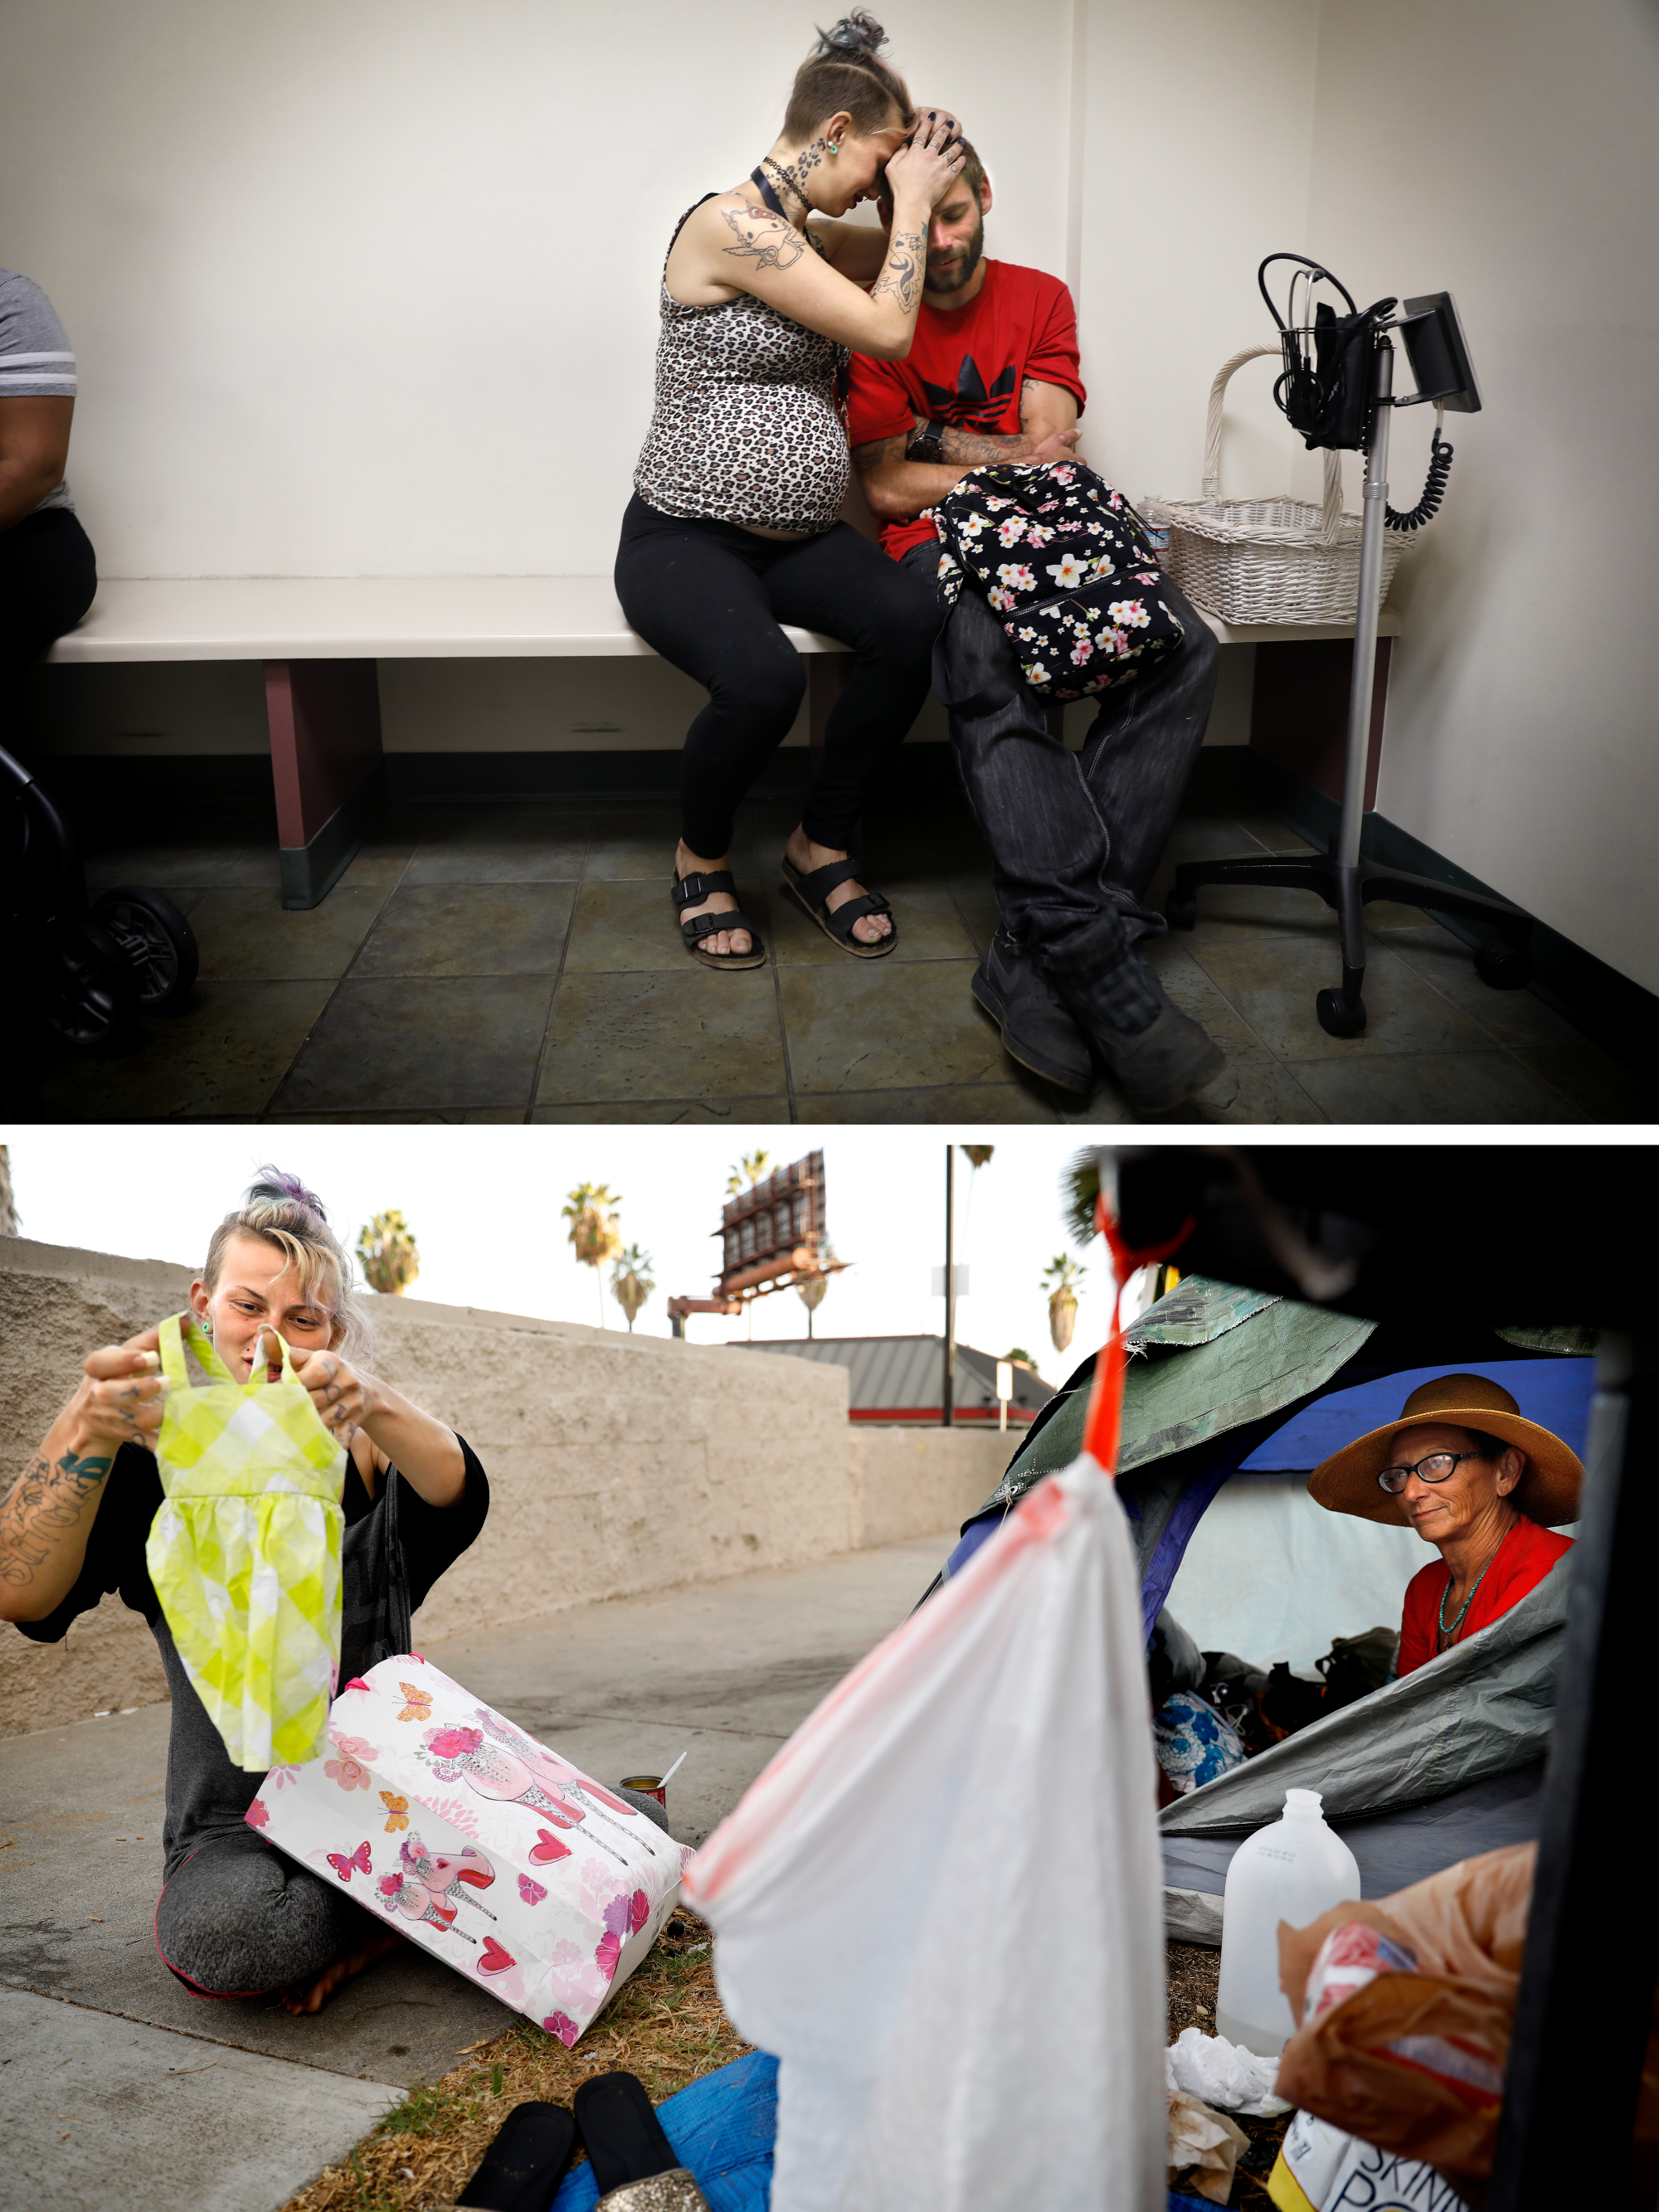 Two photos: A pregnant woman embraces a man's head. A woman holding up baby's clothing outside a tent